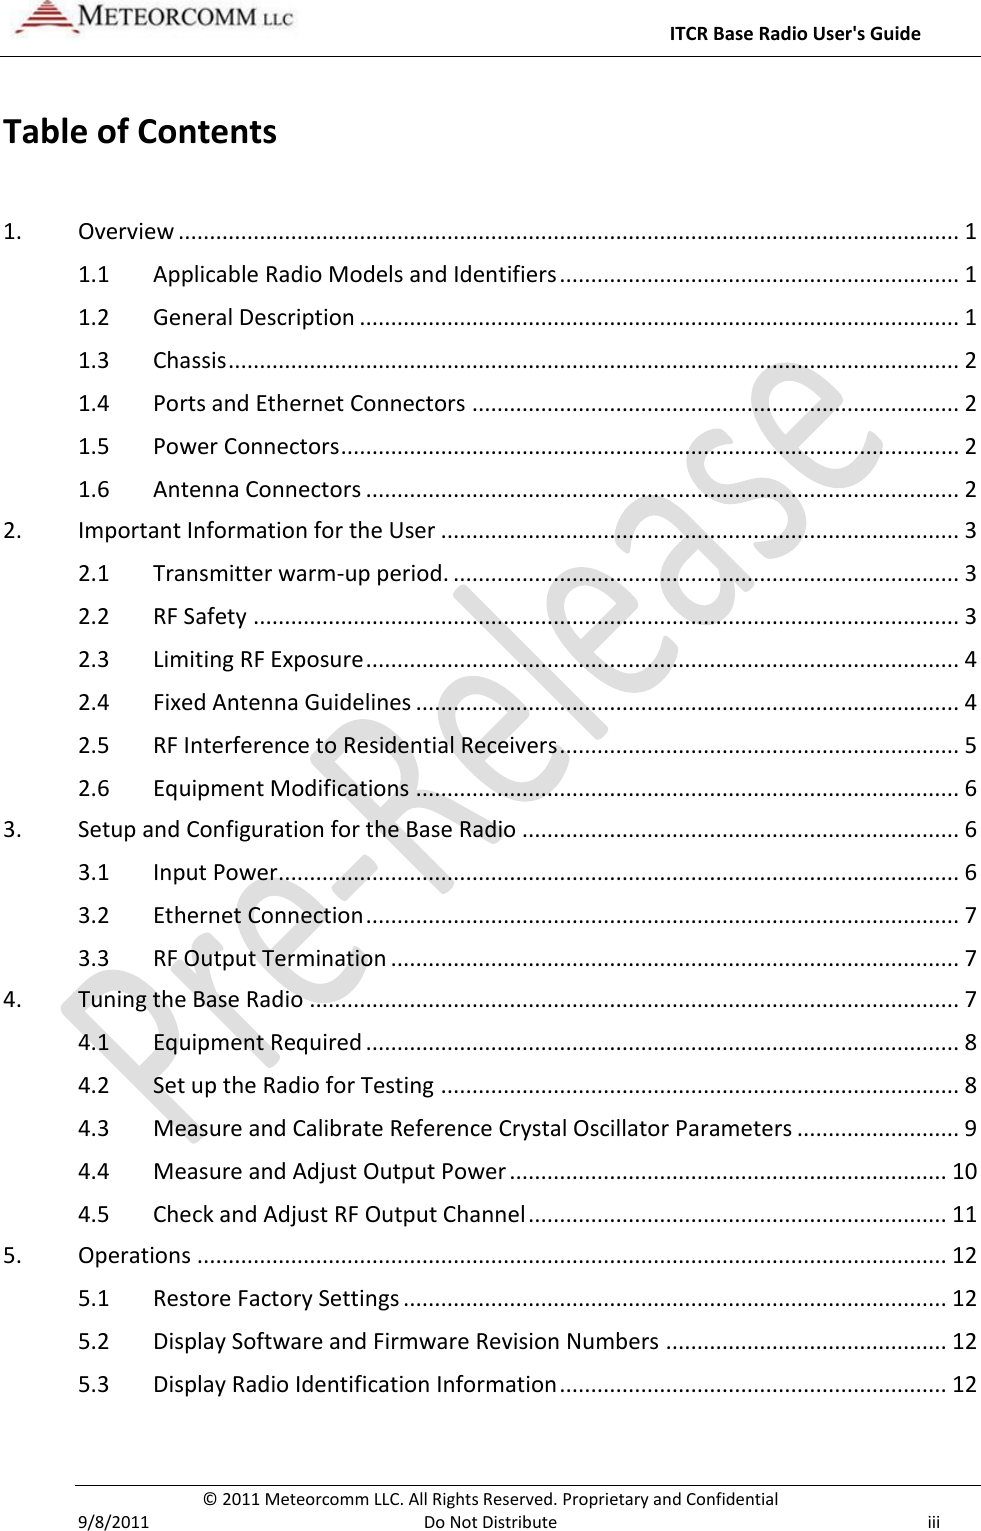     ITCR Base Radio User&apos;s Guide   © 2011 Meteorcomm LLC. All Rights Reserved. Proprietary and Confidential   9/8/2011  Do Not Distribute  iii Table of Contents  1. Overview ............................................................................................................................. 1 1.1 Applicable Radio Models and Identifiers ................................................................ 1 1.2 General Description ................................................................................................ 1 1.3 Chassis ..................................................................................................................... 2 1.4 Ports and Ethernet Connectors .............................................................................. 2 1.5 Power Connectors ................................................................................................... 2 1.6 Antenna Connectors ............................................................................................... 2 2. Important Information for the User ................................................................................... 3 2.1 Transmitter warm-up period. ................................................................................. 3 2.2 RF Safety ................................................................................................................. 3 2.3 Limiting RF Exposure ............................................................................................... 4 2.4 Fixed Antenna Guidelines ....................................................................................... 4 2.5 RF Interference to Residential Receivers ................................................................ 5 2.6 Equipment Modifications ....................................................................................... 6 3. Setup and Configuration for the Base Radio ...................................................................... 6 3.1 Input Power ............................................................................................................. 6 3.2 Ethernet Connection ............................................................................................... 7 3.3 RF Output Termination ........................................................................................... 7 4. Tuning the Base Radio ........................................................................................................ 7 4.1 Equipment Required ............................................................................................... 8 4.2 Set up the Radio for Testing ................................................................................... 8 4.3 Measure and Calibrate Reference Crystal Oscillator Parameters .......................... 9 4.4 Measure and Adjust Output Power ...................................................................... 10 4.5 Check and Adjust RF Output Channel ................................................................... 11 5. Operations ........................................................................................................................ 12 5.1 Restore Factory Settings ....................................................................................... 12 5.2 Display Software and Firmware Revision Numbers ............................................. 12 5.3 Display Radio Identification Information .............................................................. 12   